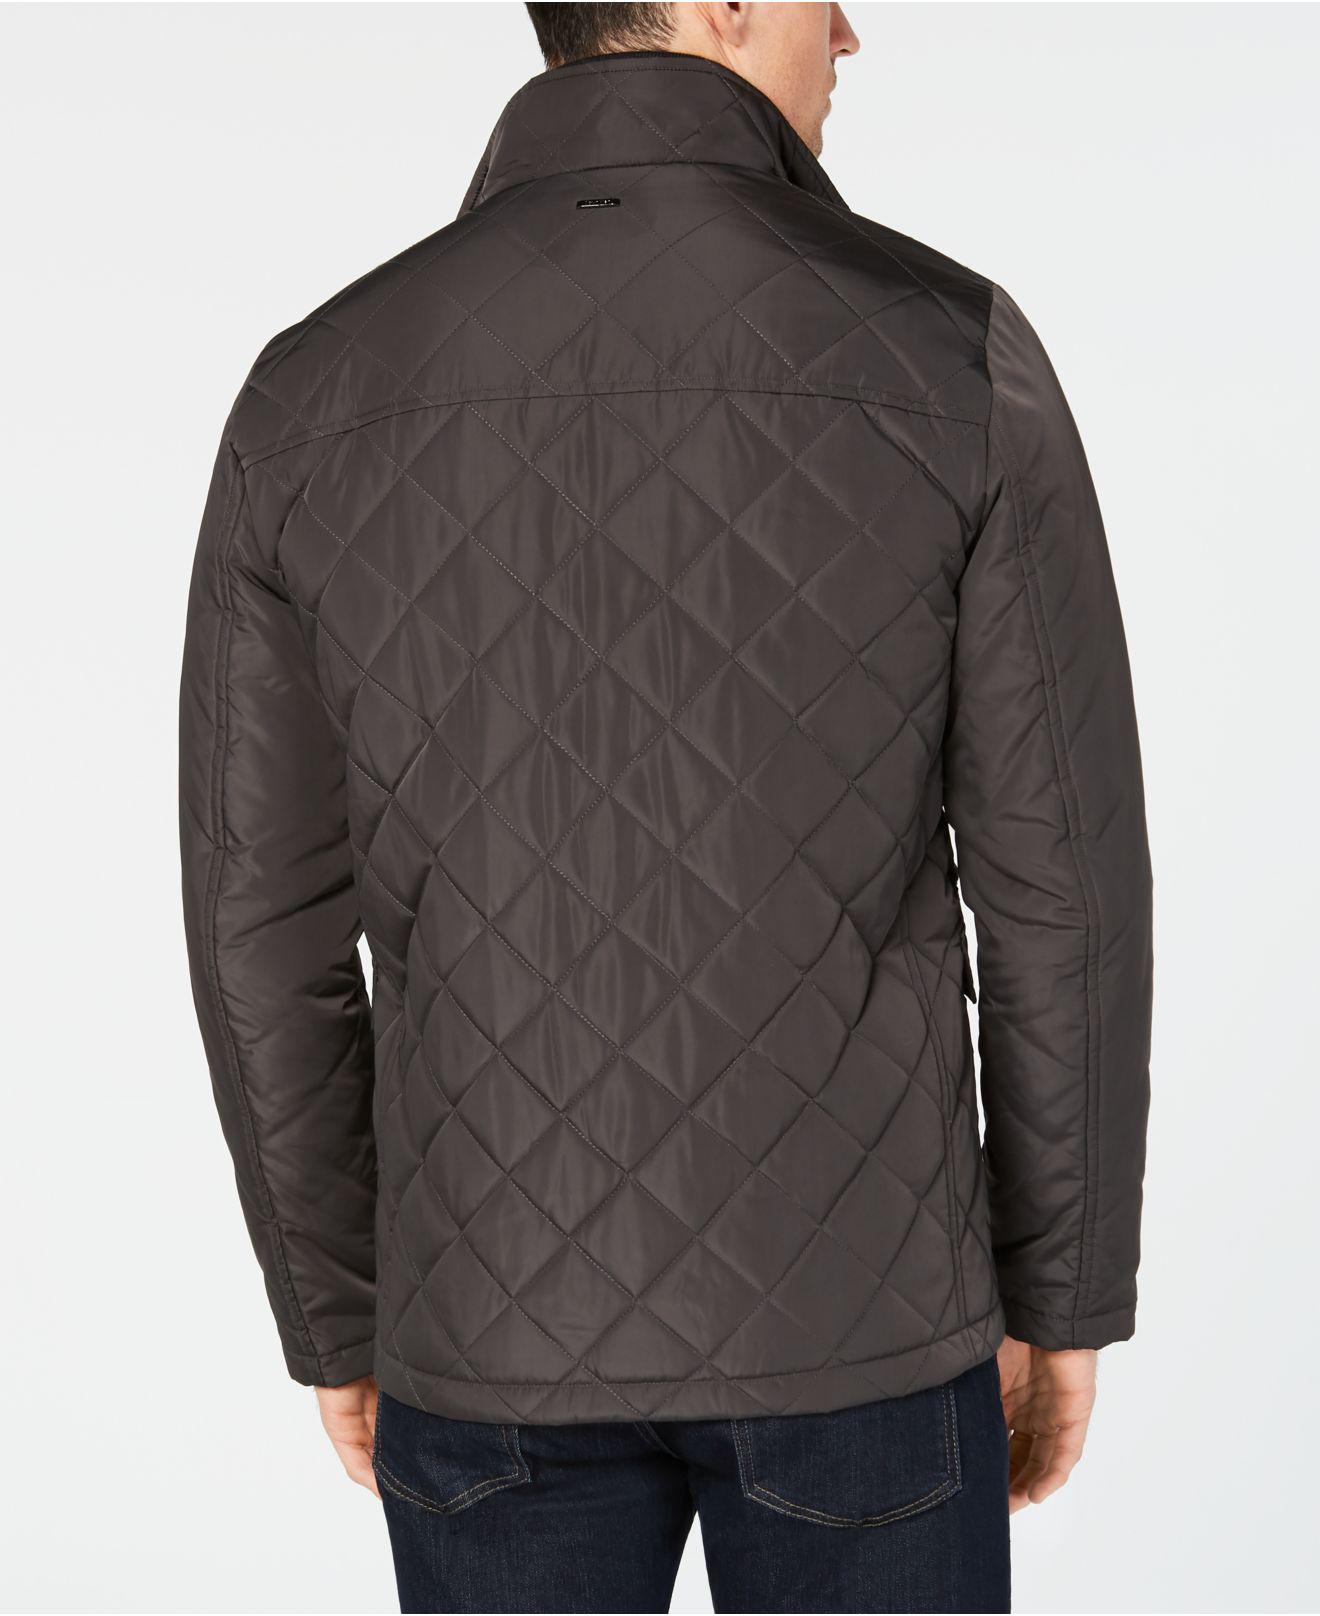 Calvin Klein Synthetic Quilted Overcoat in Gray for Men - Lyst